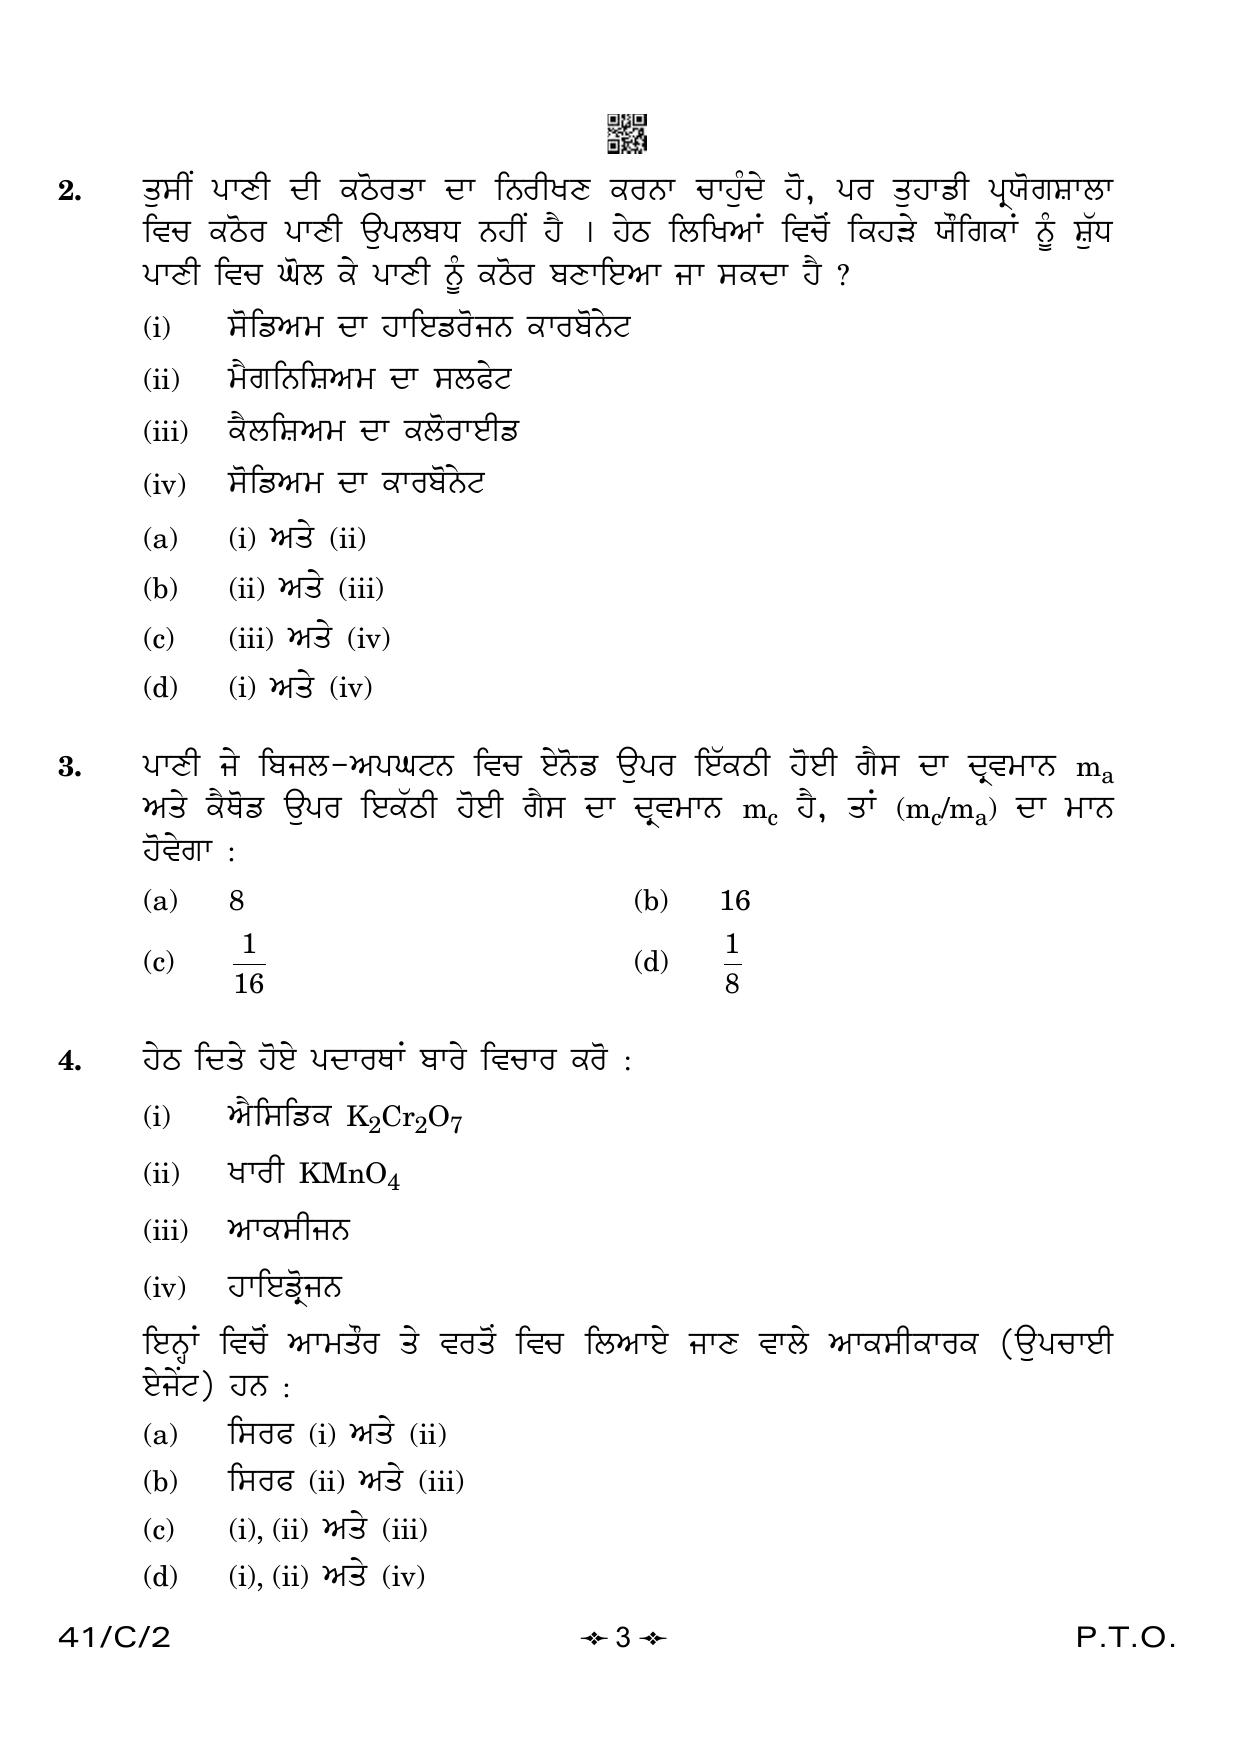 CBSE Class 10 41-2 Science Punjabi 2023 (Compartment) Question Paper - Page 3